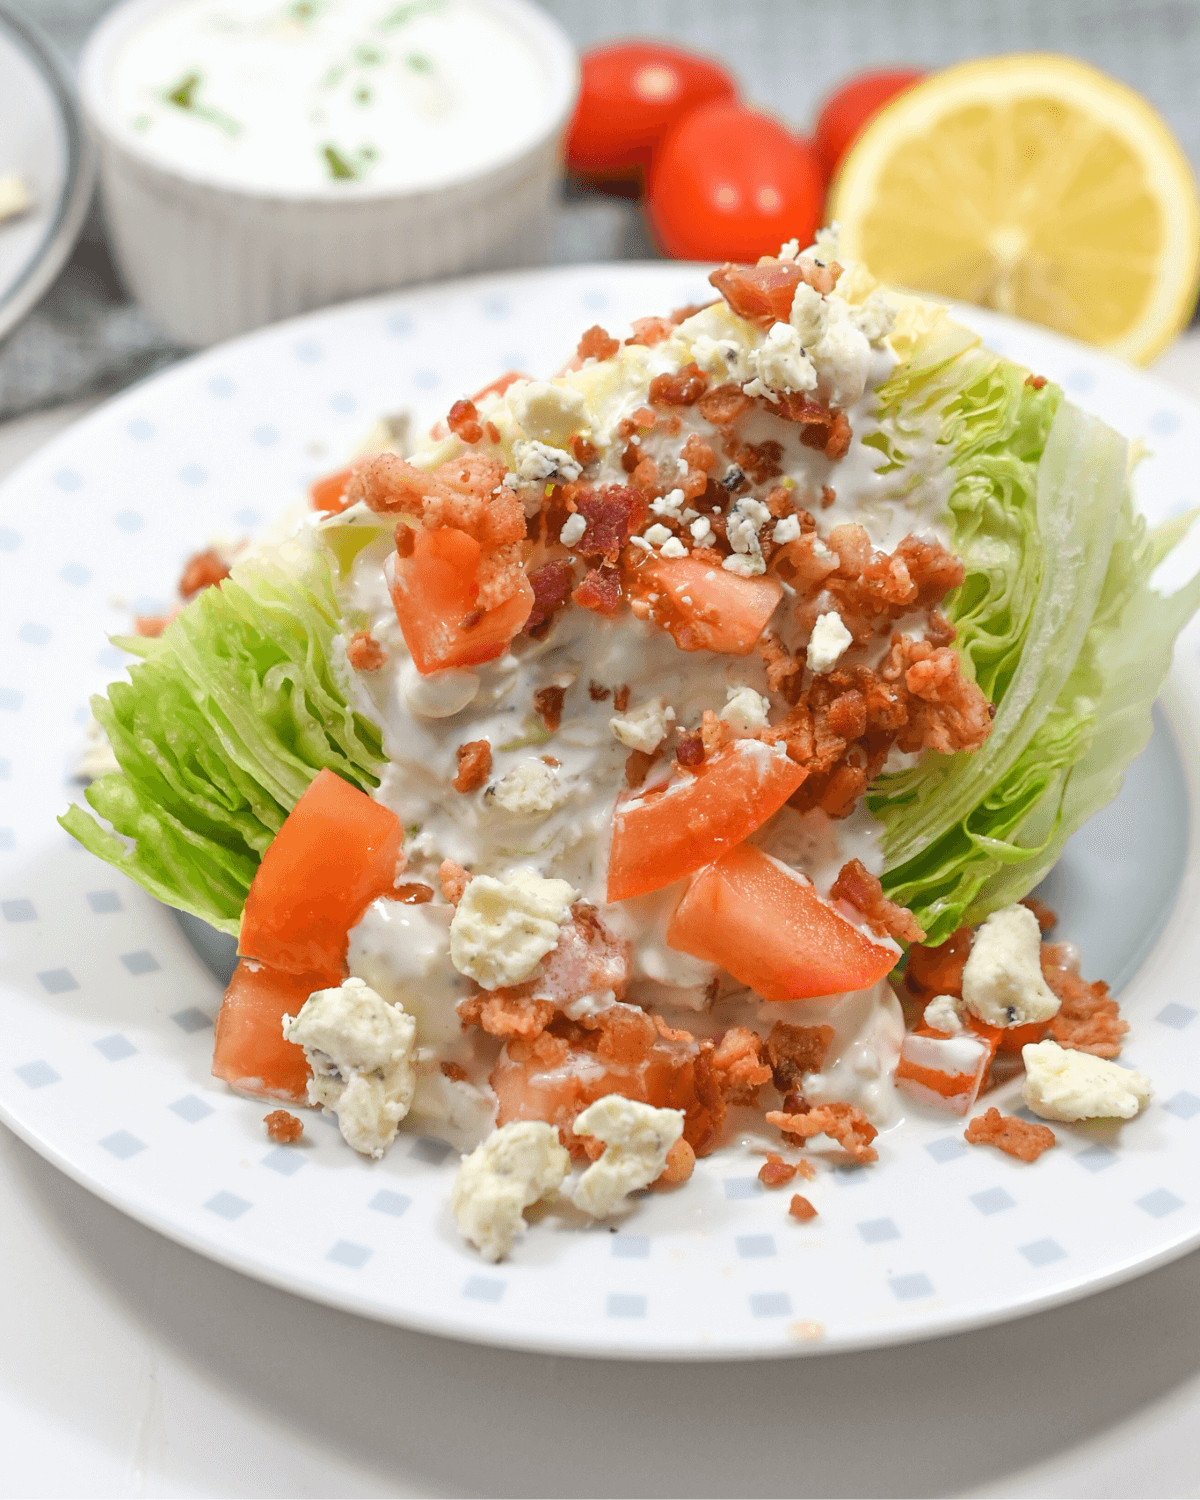 A plate with a wedge salad- lettuce, tomatoes and dressing on it.